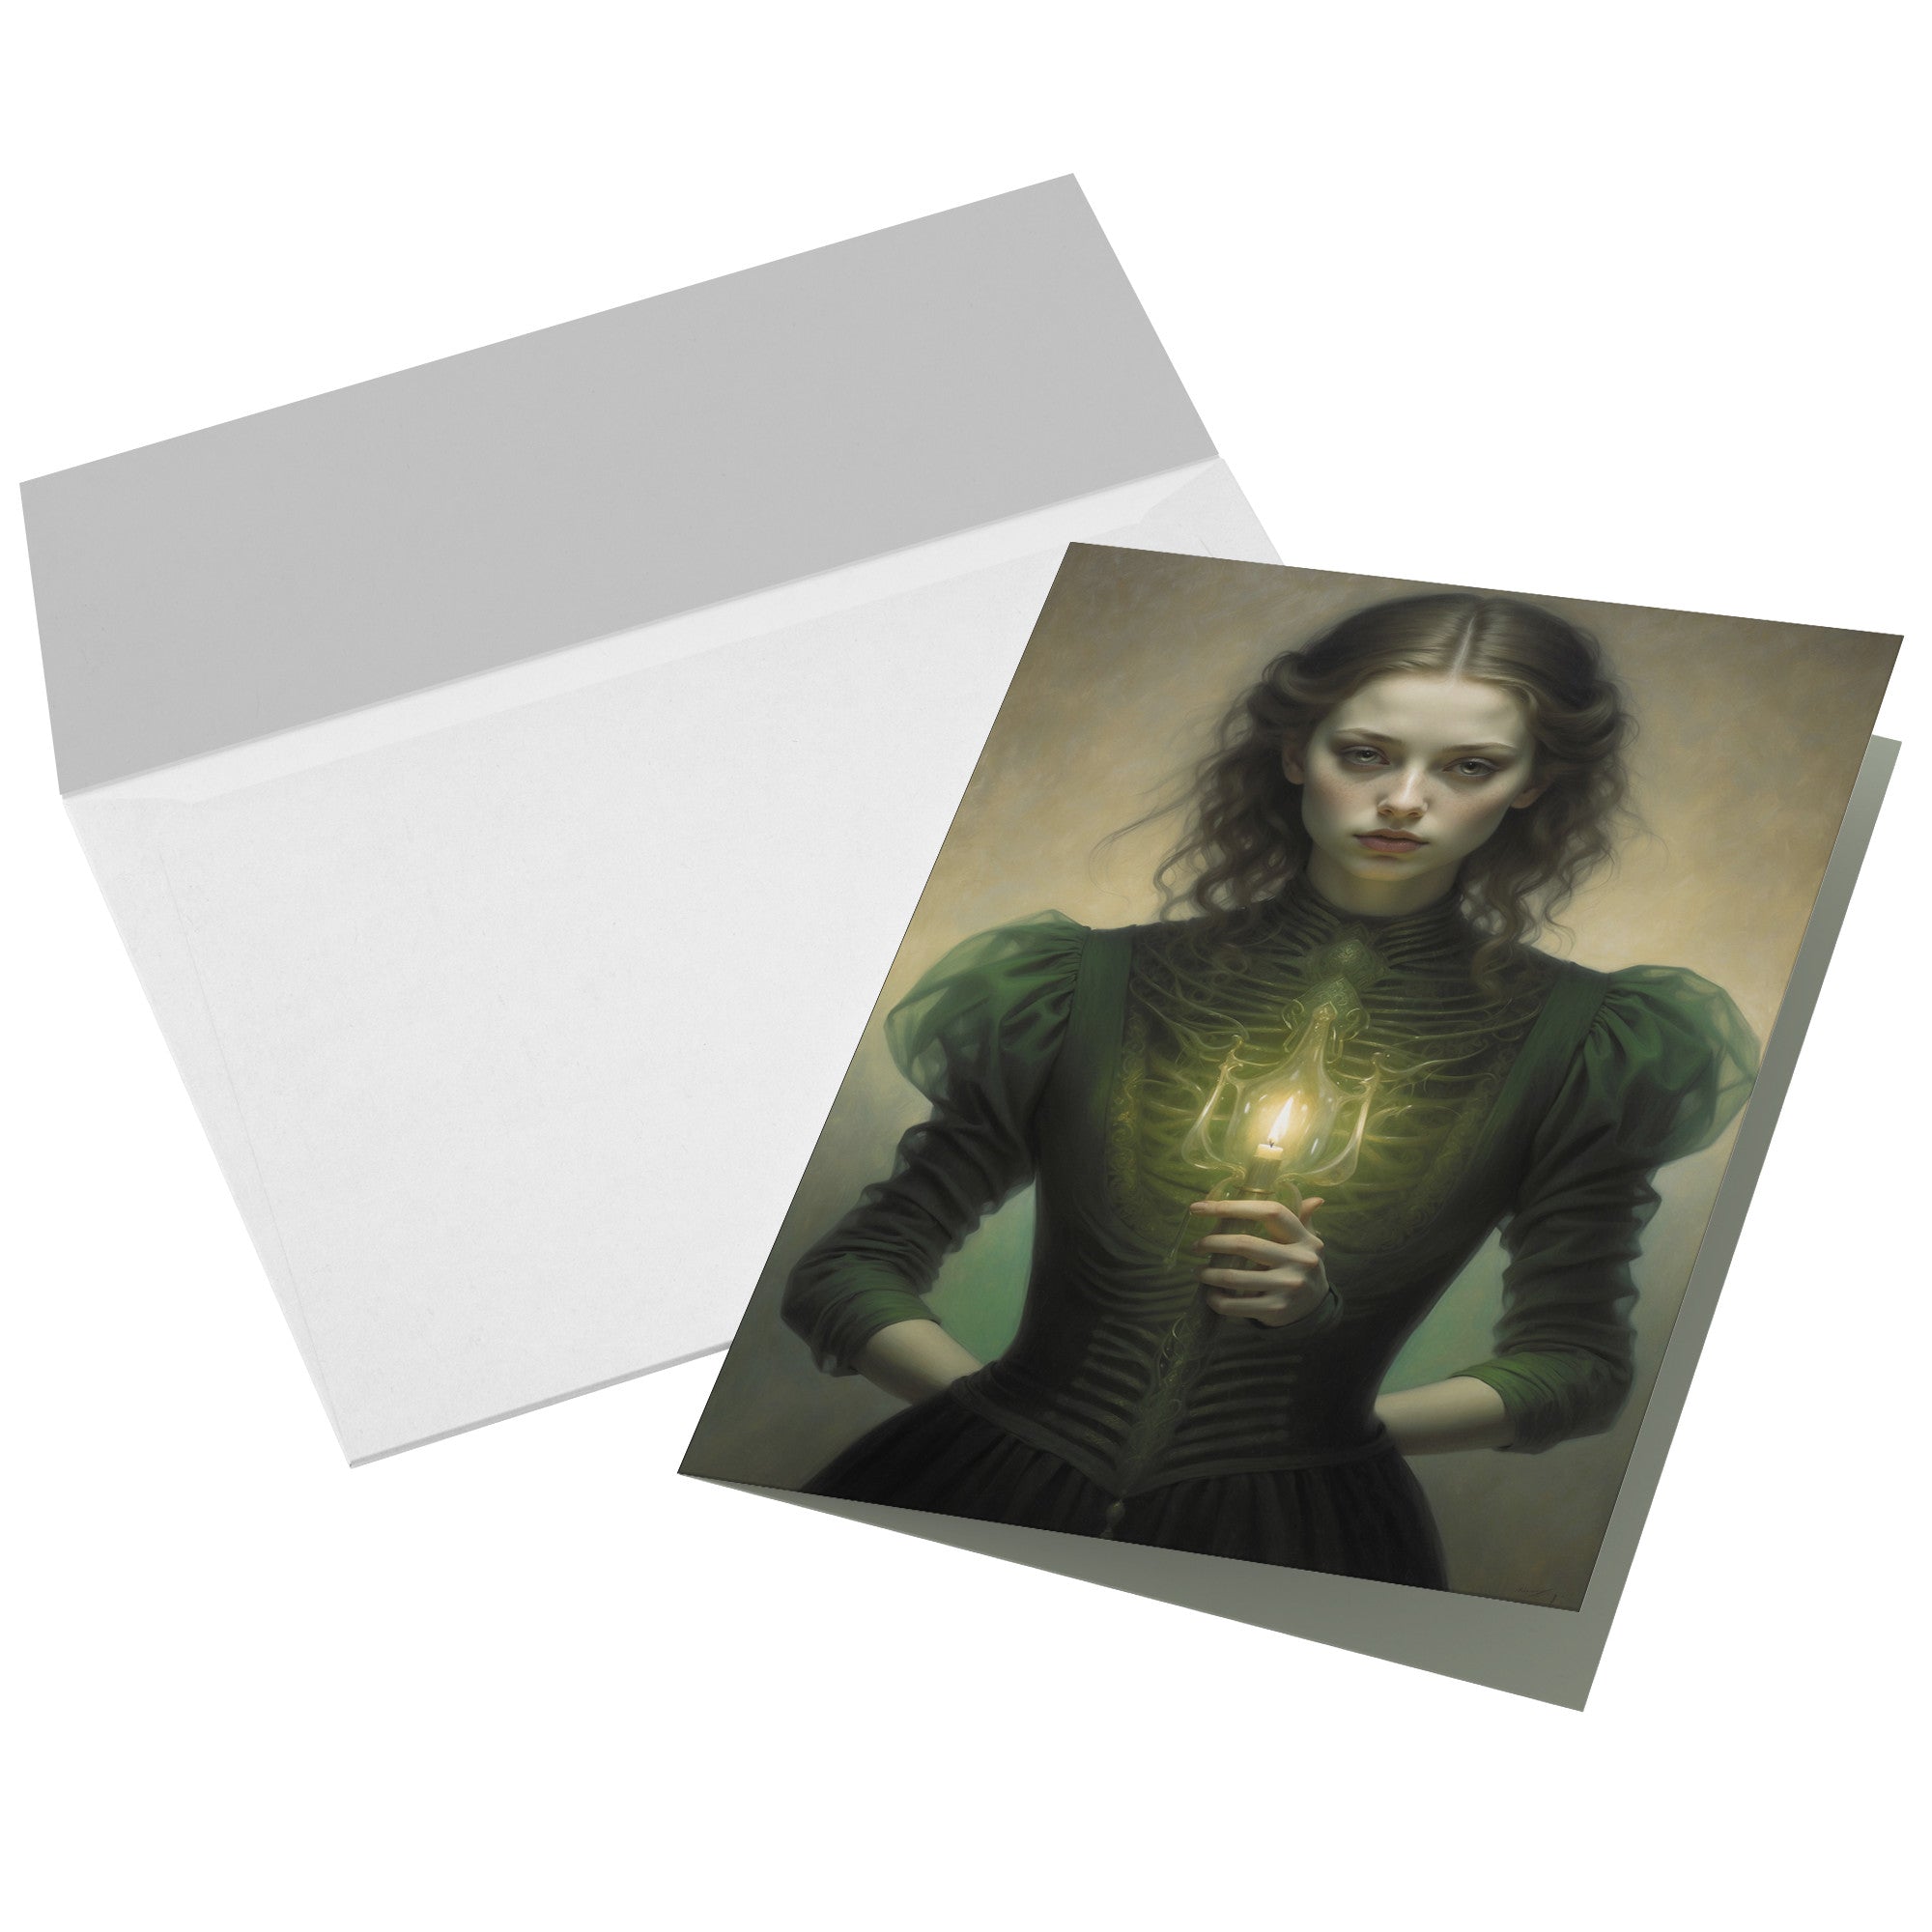 The Apparition, Ghostly Set of Halloween Greeting Cards, With White Envelopes, 5in x 7in